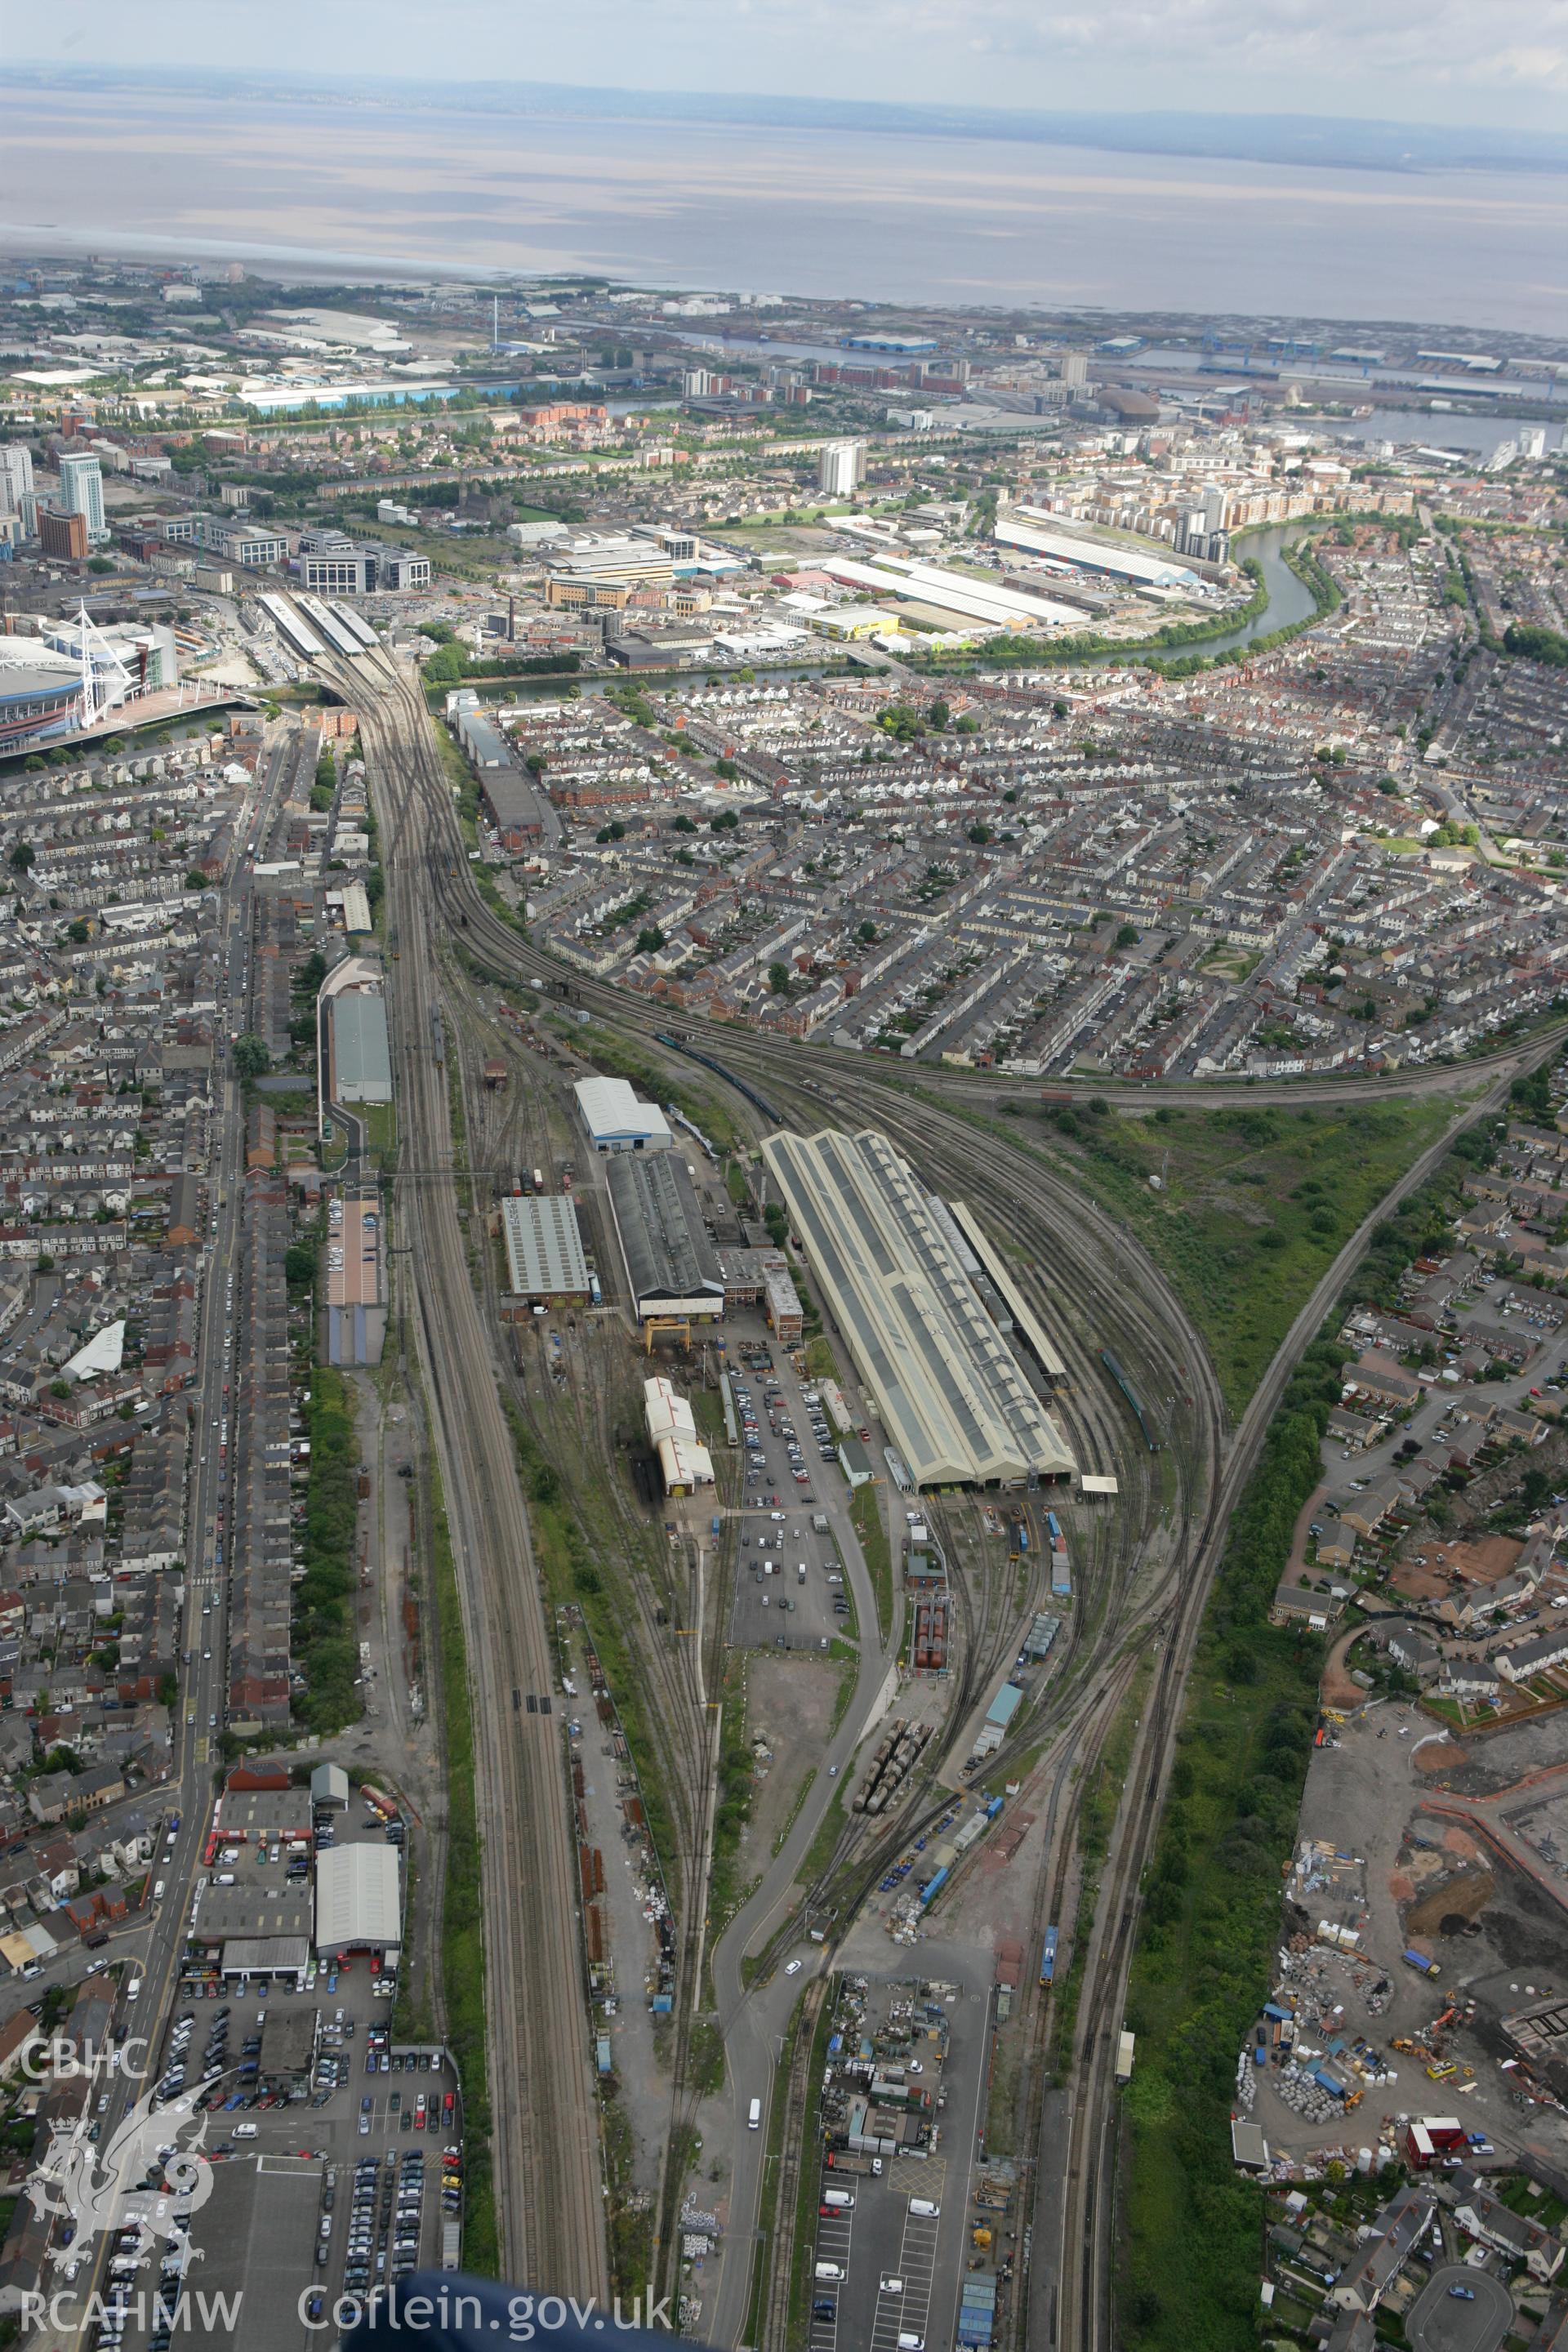 RCAHMW colour oblique photograph of railway terminals, Saltmead, Cardiff, looking south-east towards Cardiff Docks. Taken by Toby Driver on 29/07/2010.